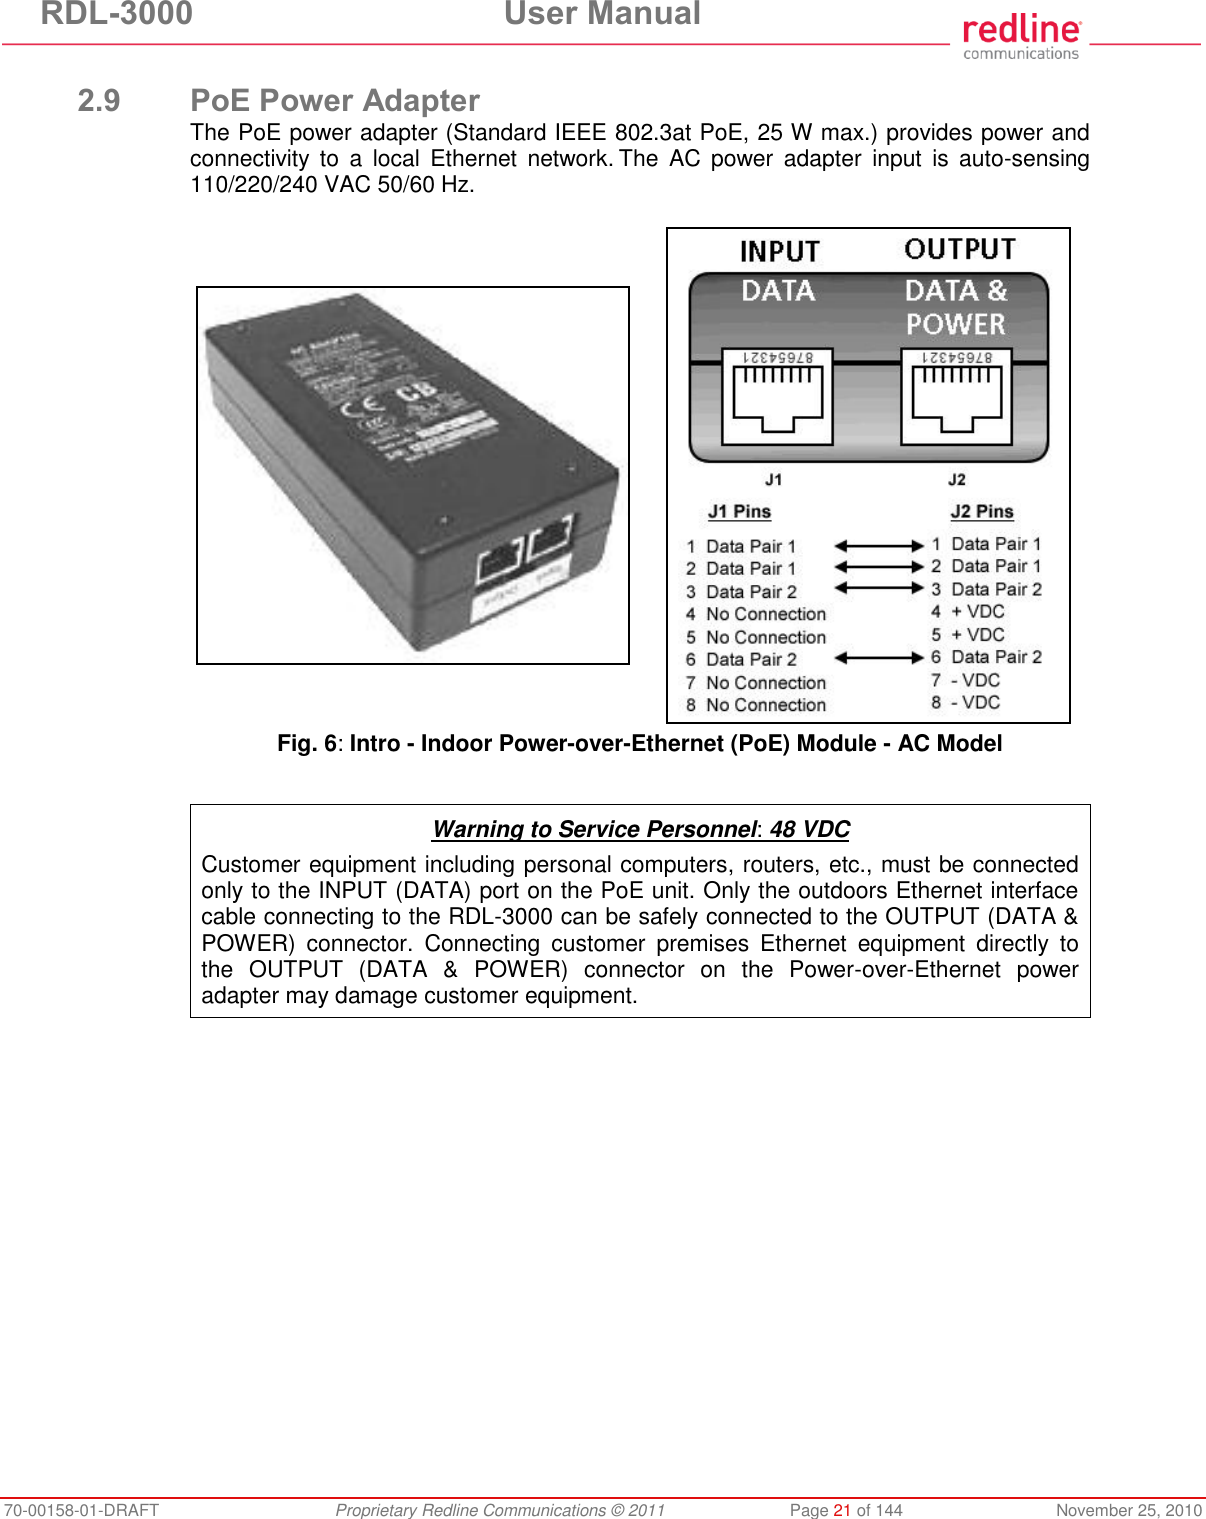 RDL-3000  User Manual 70-00158-01-DRAFT  Proprietary Redline Communications © 2011  Page 21 of 144  November 25, 2010  2.9 PoE Power Adapter The PoE power adapter (Standard IEEE 802.3at PoE, 25 W max.) provides power and connectivity  to  a  local  Ethernet  network. The  AC  power  adapter  input  is  auto-sensing 110/220/240 VAC 50/60 Hz.     Fig. 6: Intro - Indoor Power-over-Ethernet (PoE) Module - AC Model   Warning to Service Personnel: 48 VDC Customer equipment including personal computers, routers, etc., must be connected only to the INPUT (DATA) port on the PoE unit. Only the outdoors Ethernet interface cable connecting to the RDL-3000 can be safely connected to the OUTPUT (DATA &amp; POWER)  connector.  Connecting  customer  premises  Ethernet  equipment  directly  to the  OUTPUT  (DATA  &amp;  POWER)  connector  on  the  Power-over-Ethernet  power adapter may damage customer equipment.  